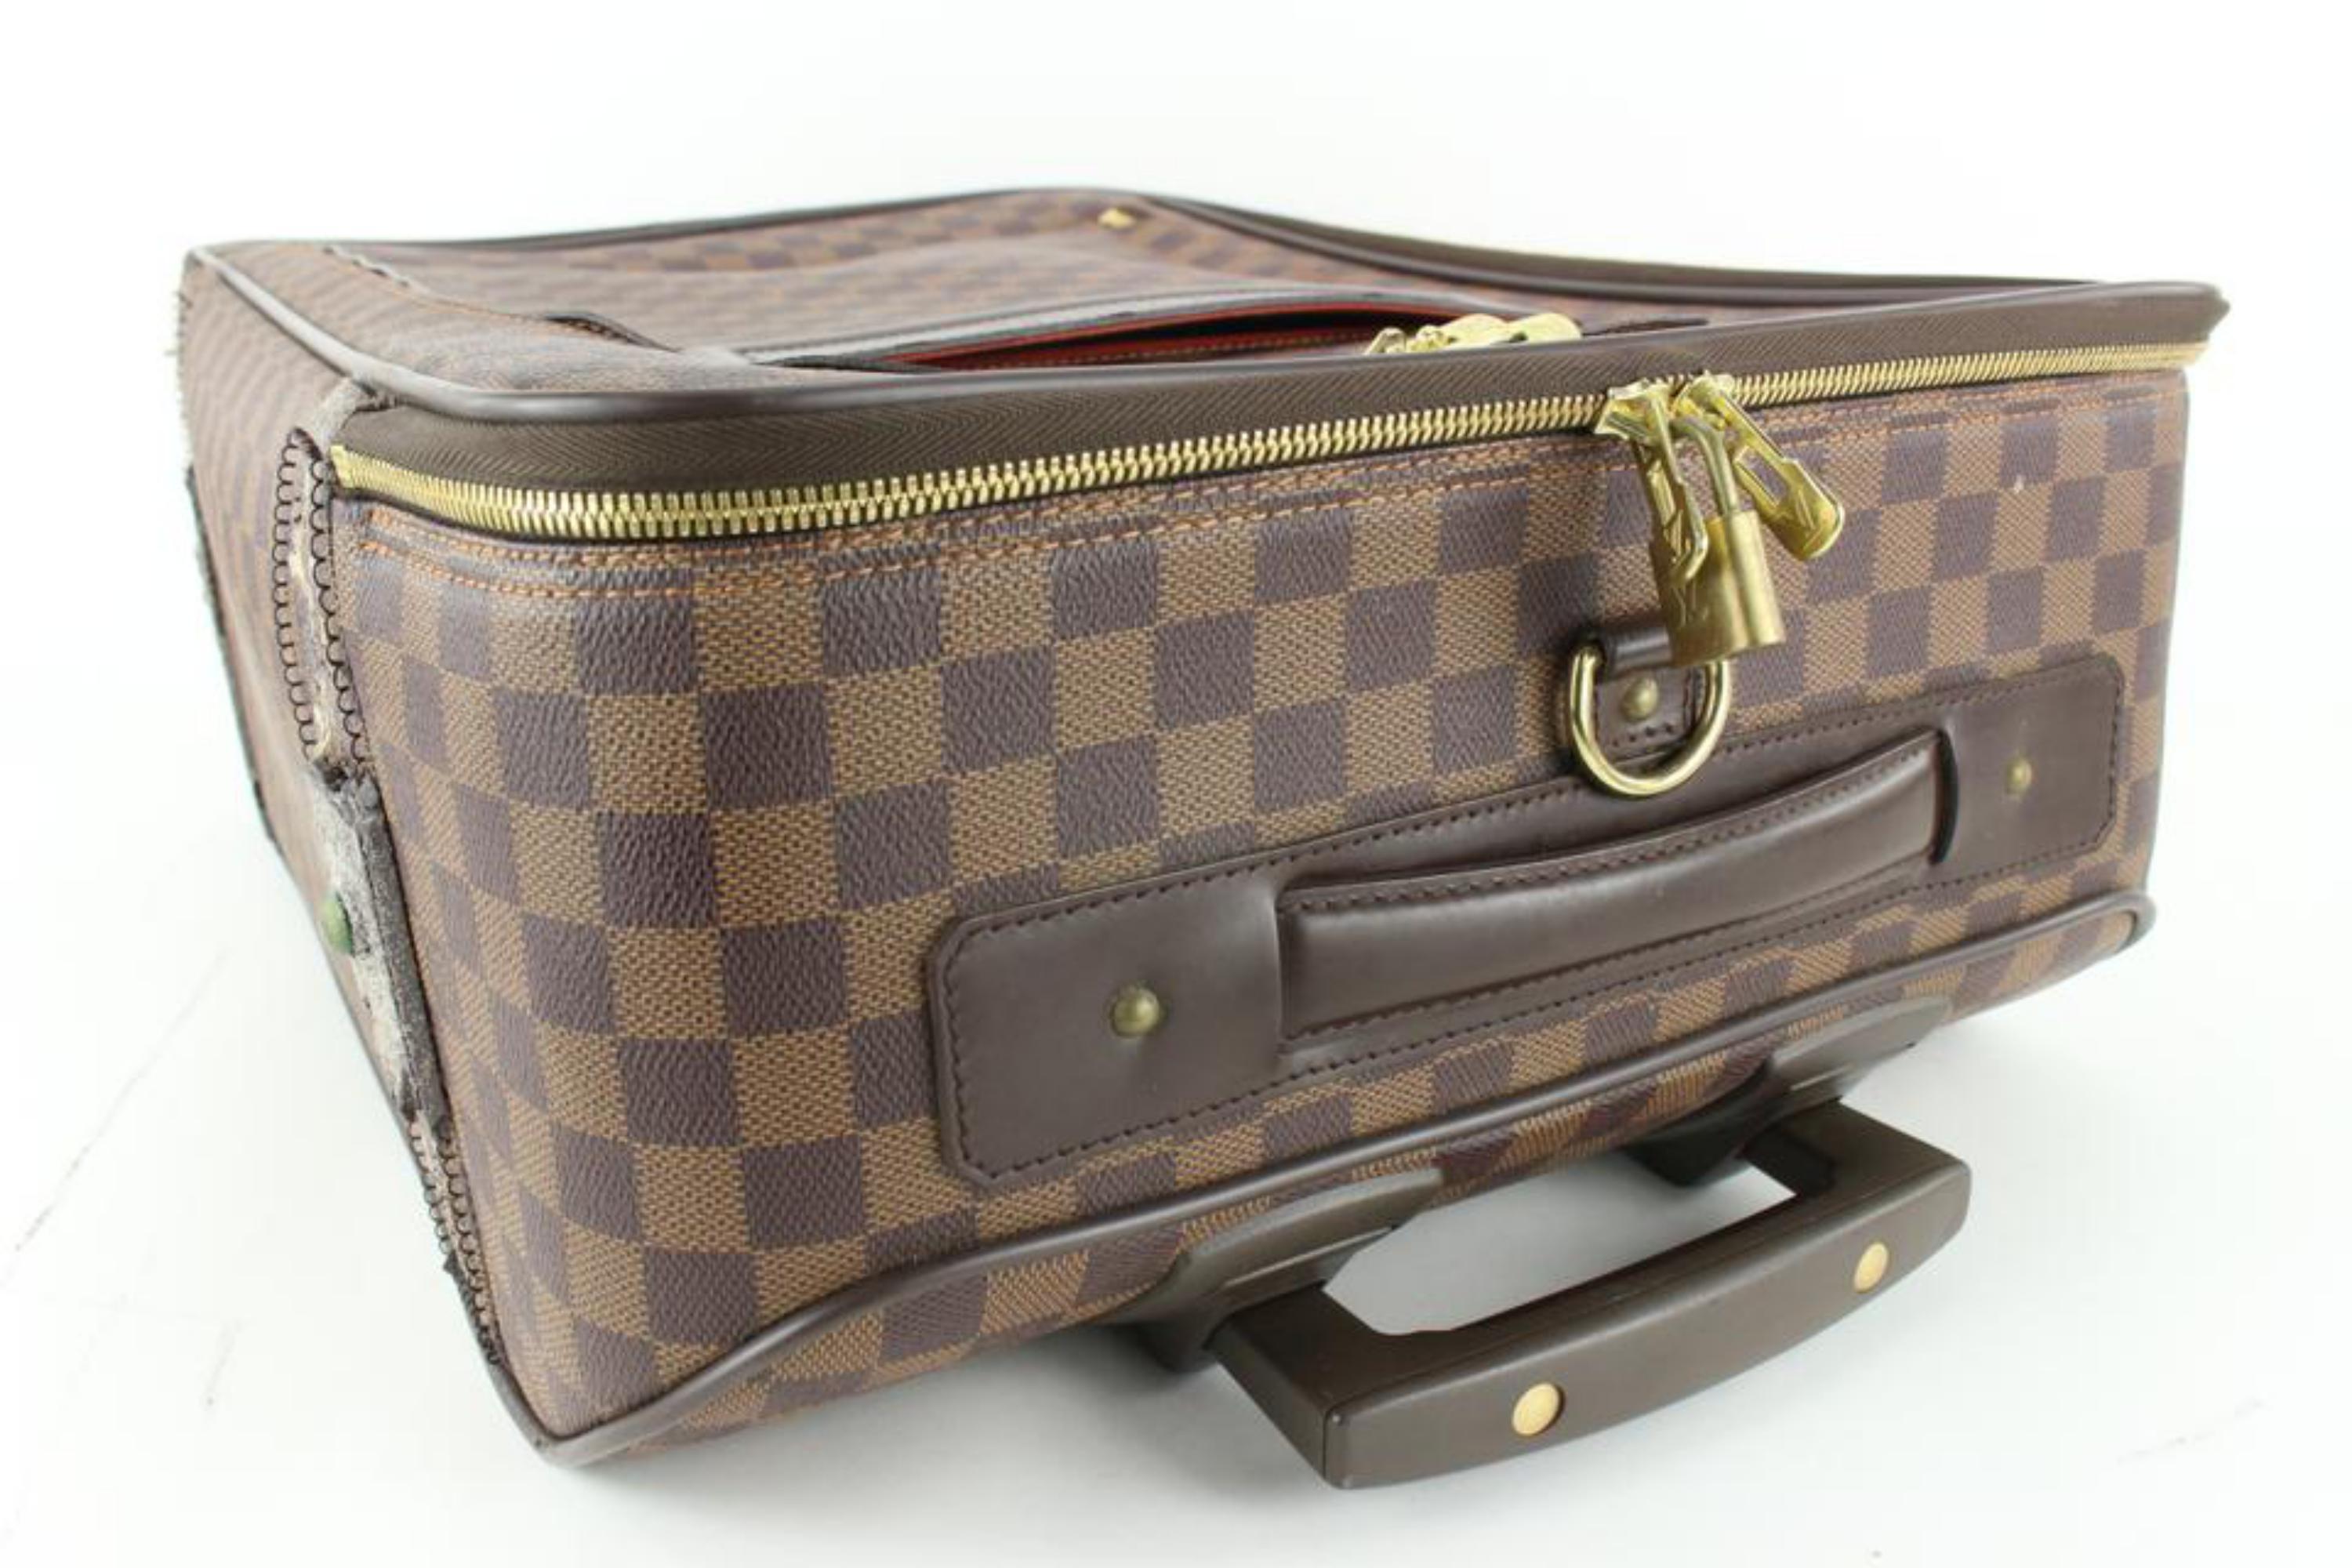 Louis Vuitton Damier Ebene PEgase 55 Rolling Luggage Trolley 6JLV107 In Fair Condition In Dix hills, NY